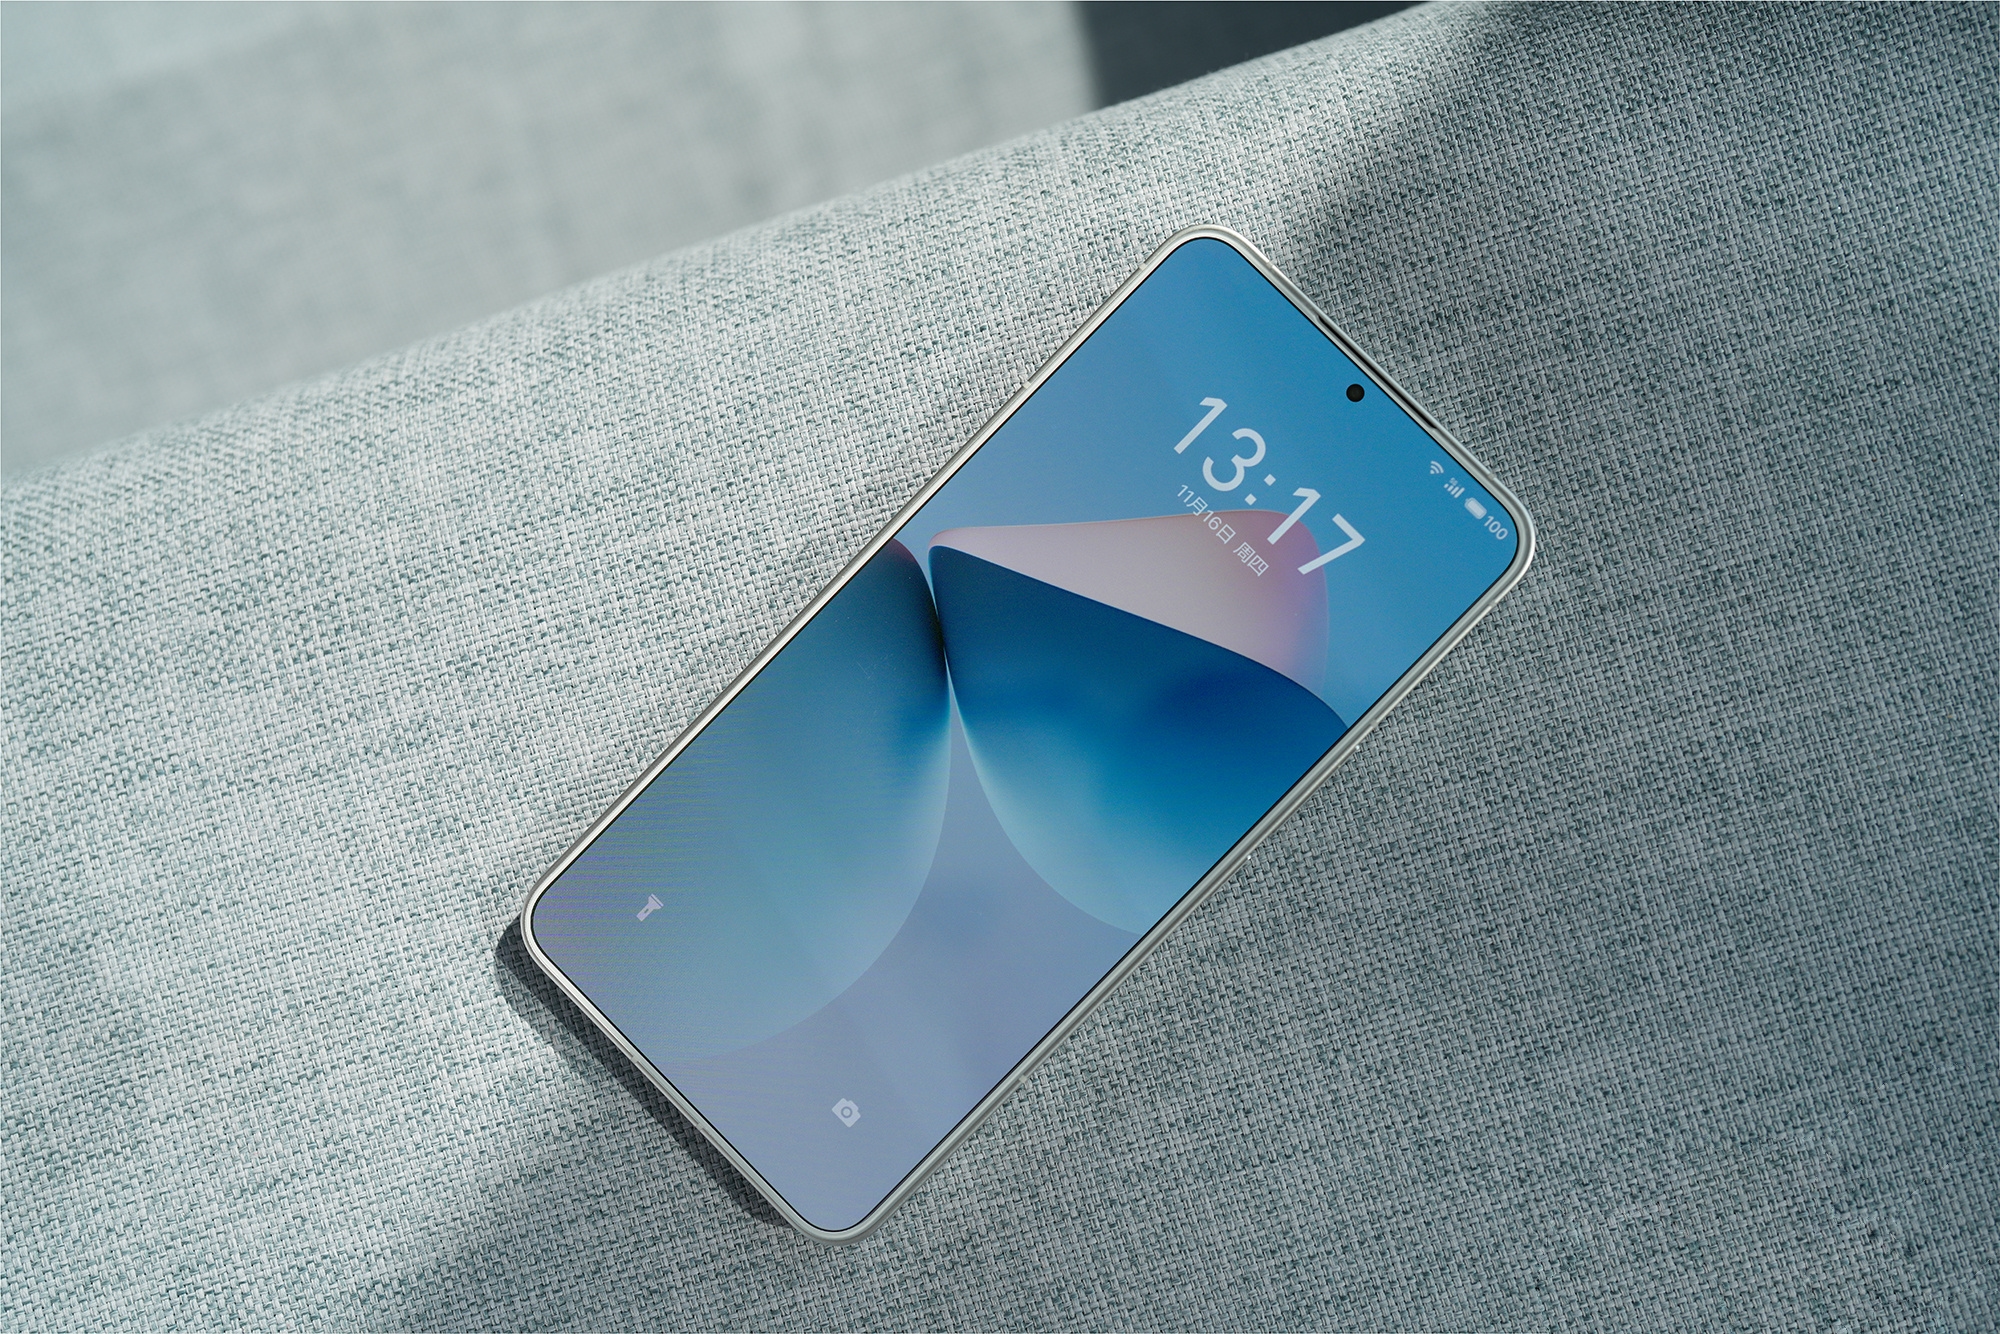 It's official: the Meizu 21 with Snapdragon 8 Gen 3 chip will debut on November 30